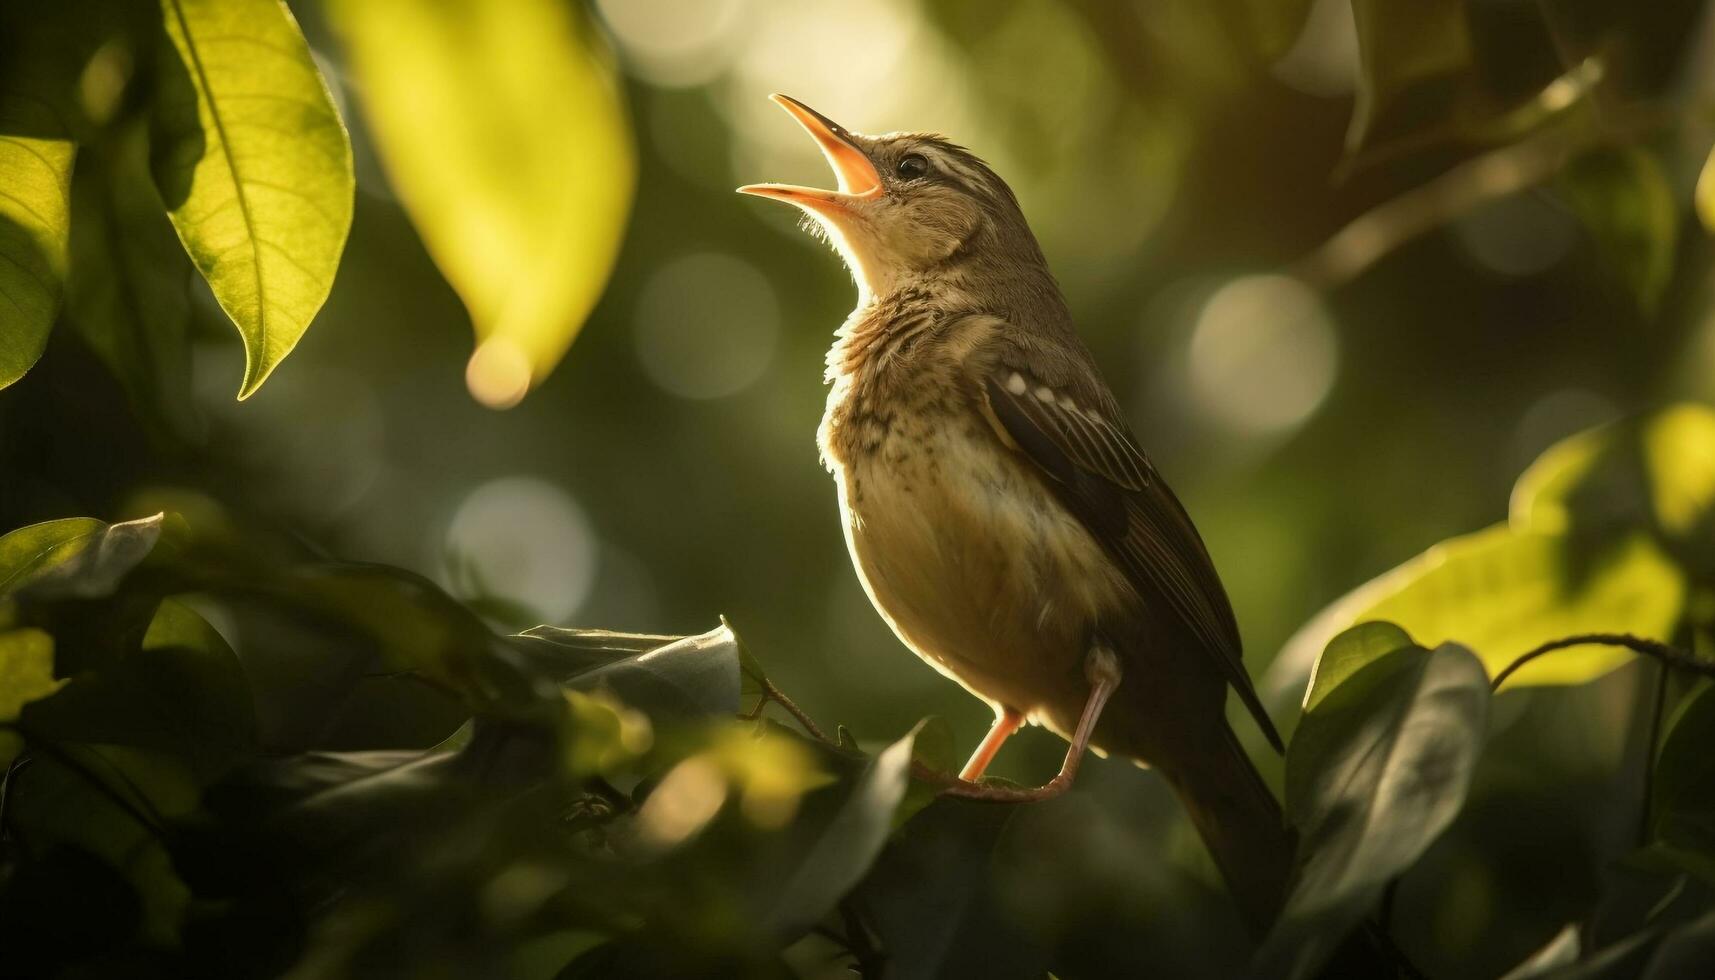 Small bird perching on branch, singing sweetly generated by AI photo